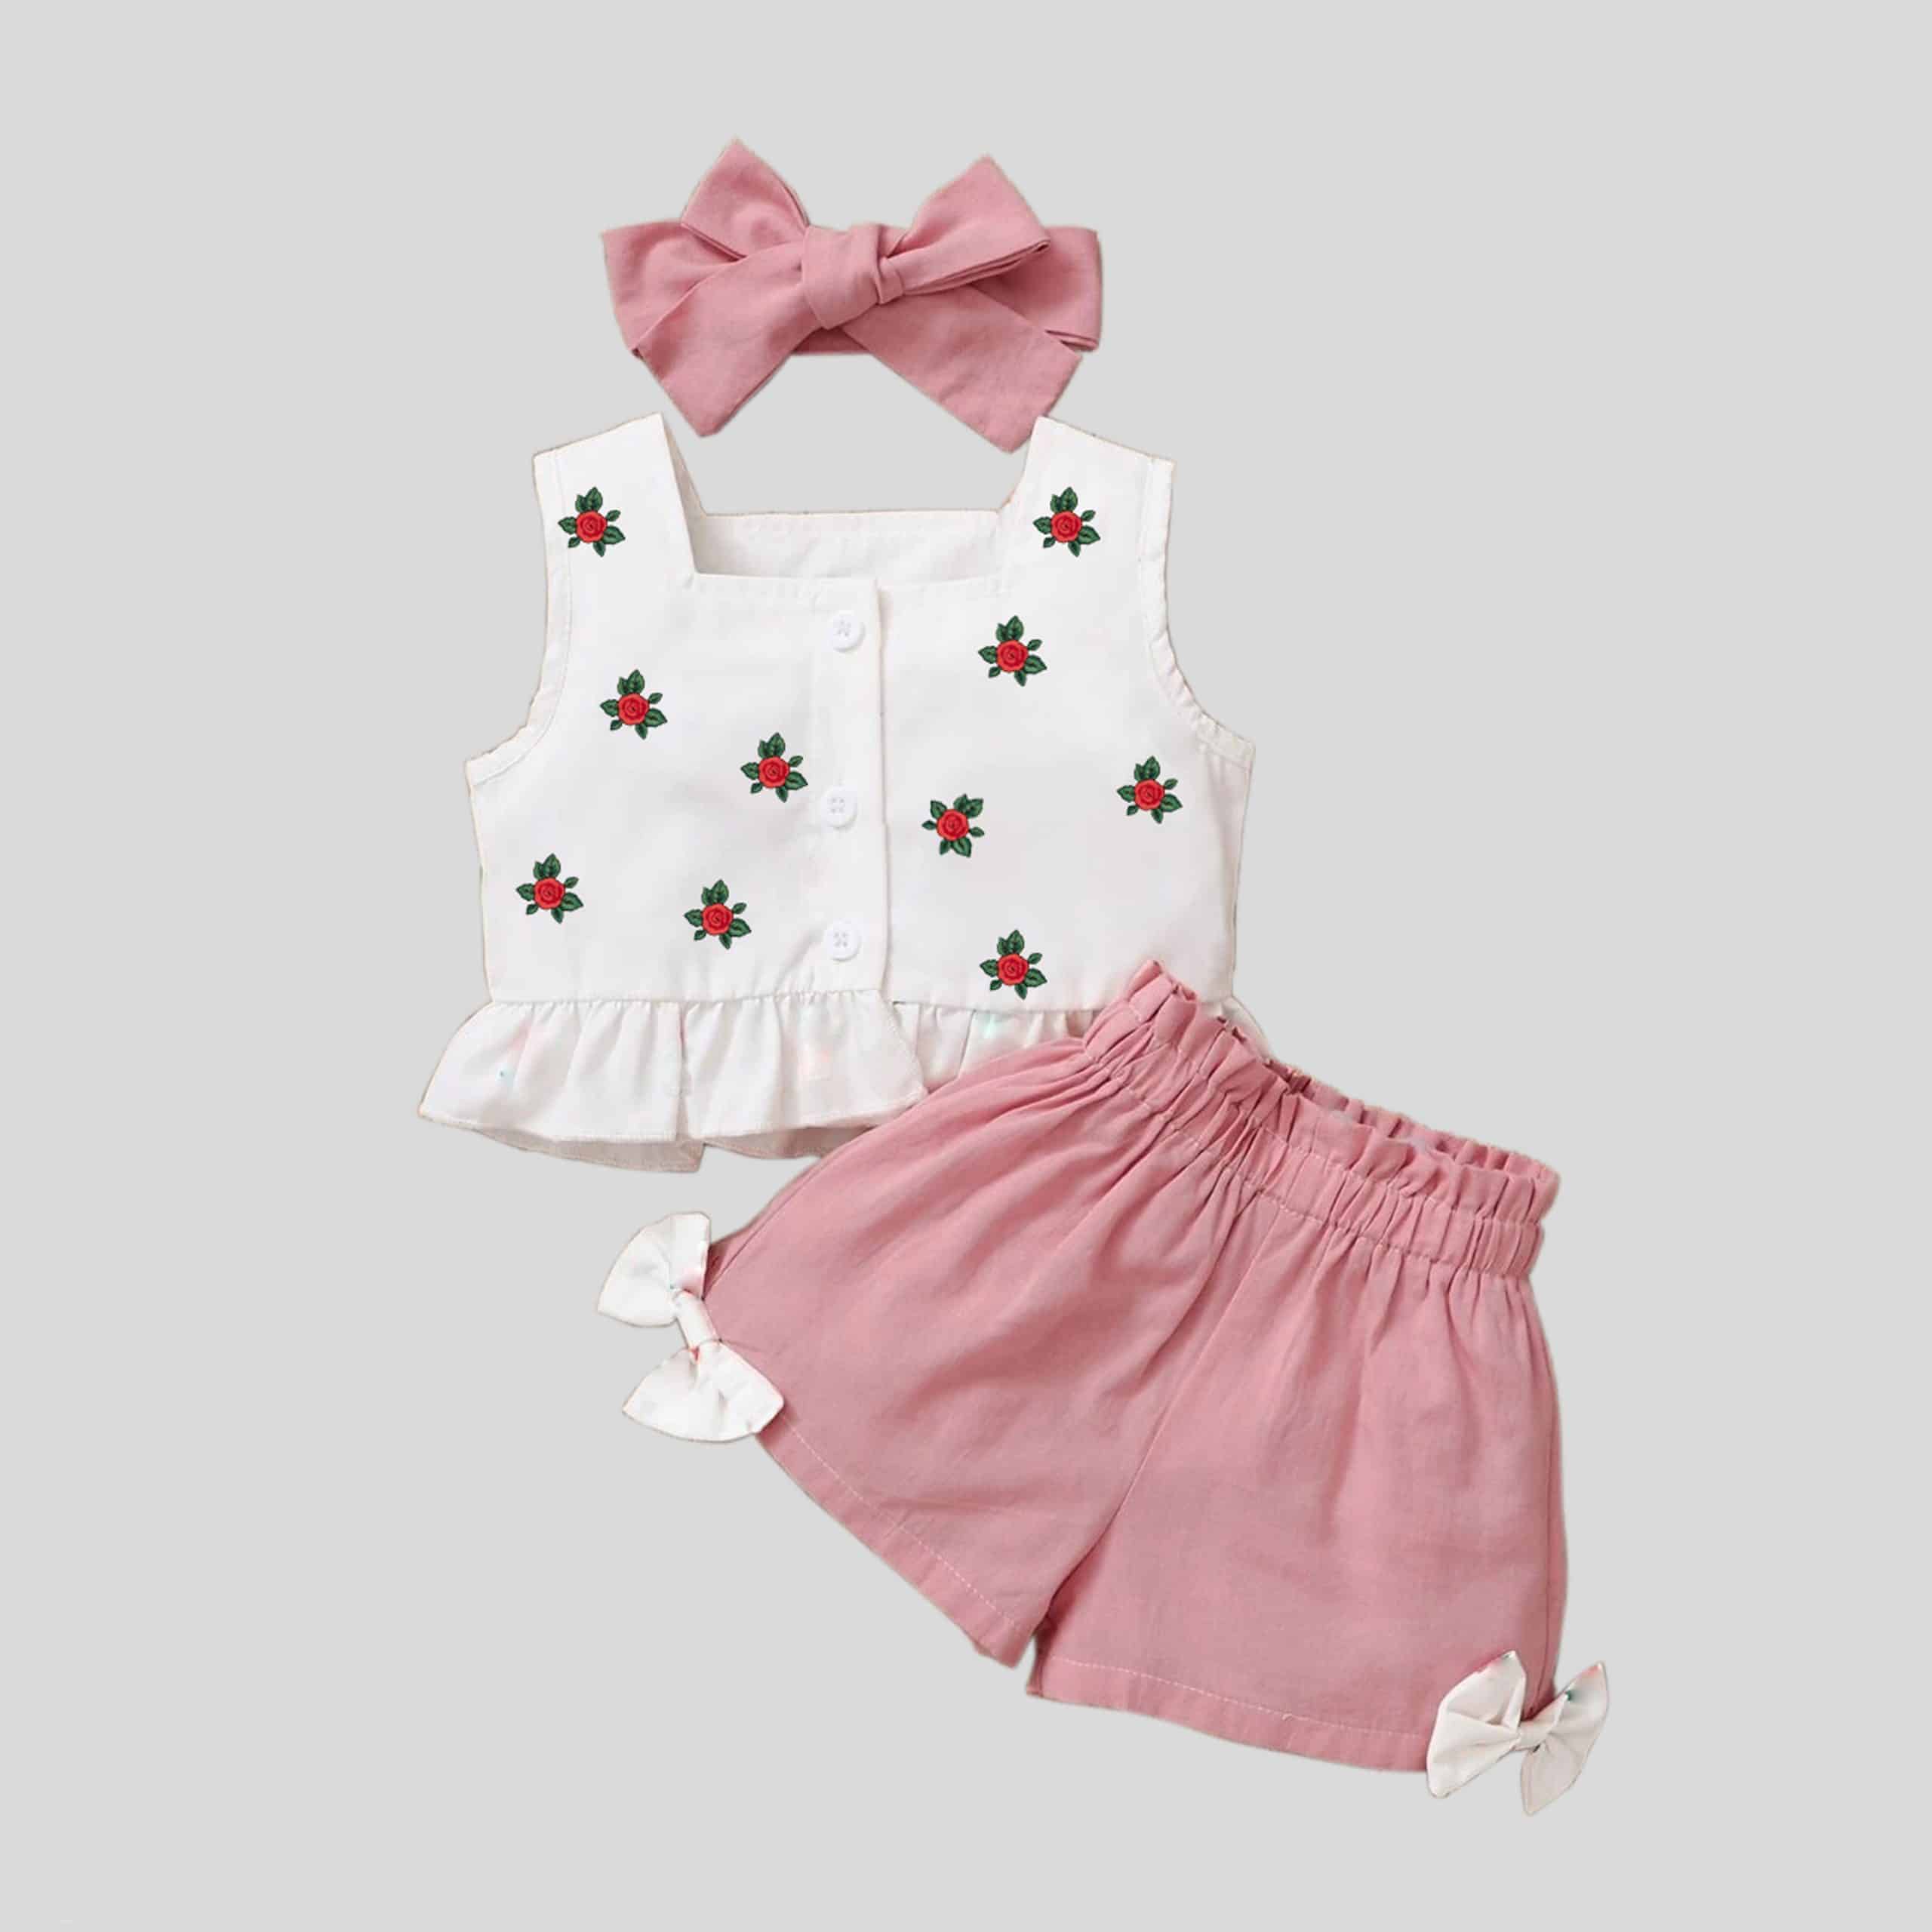 Girls white sleeveless top with floral print details, pink shorts set and matching headband-RKFCW247